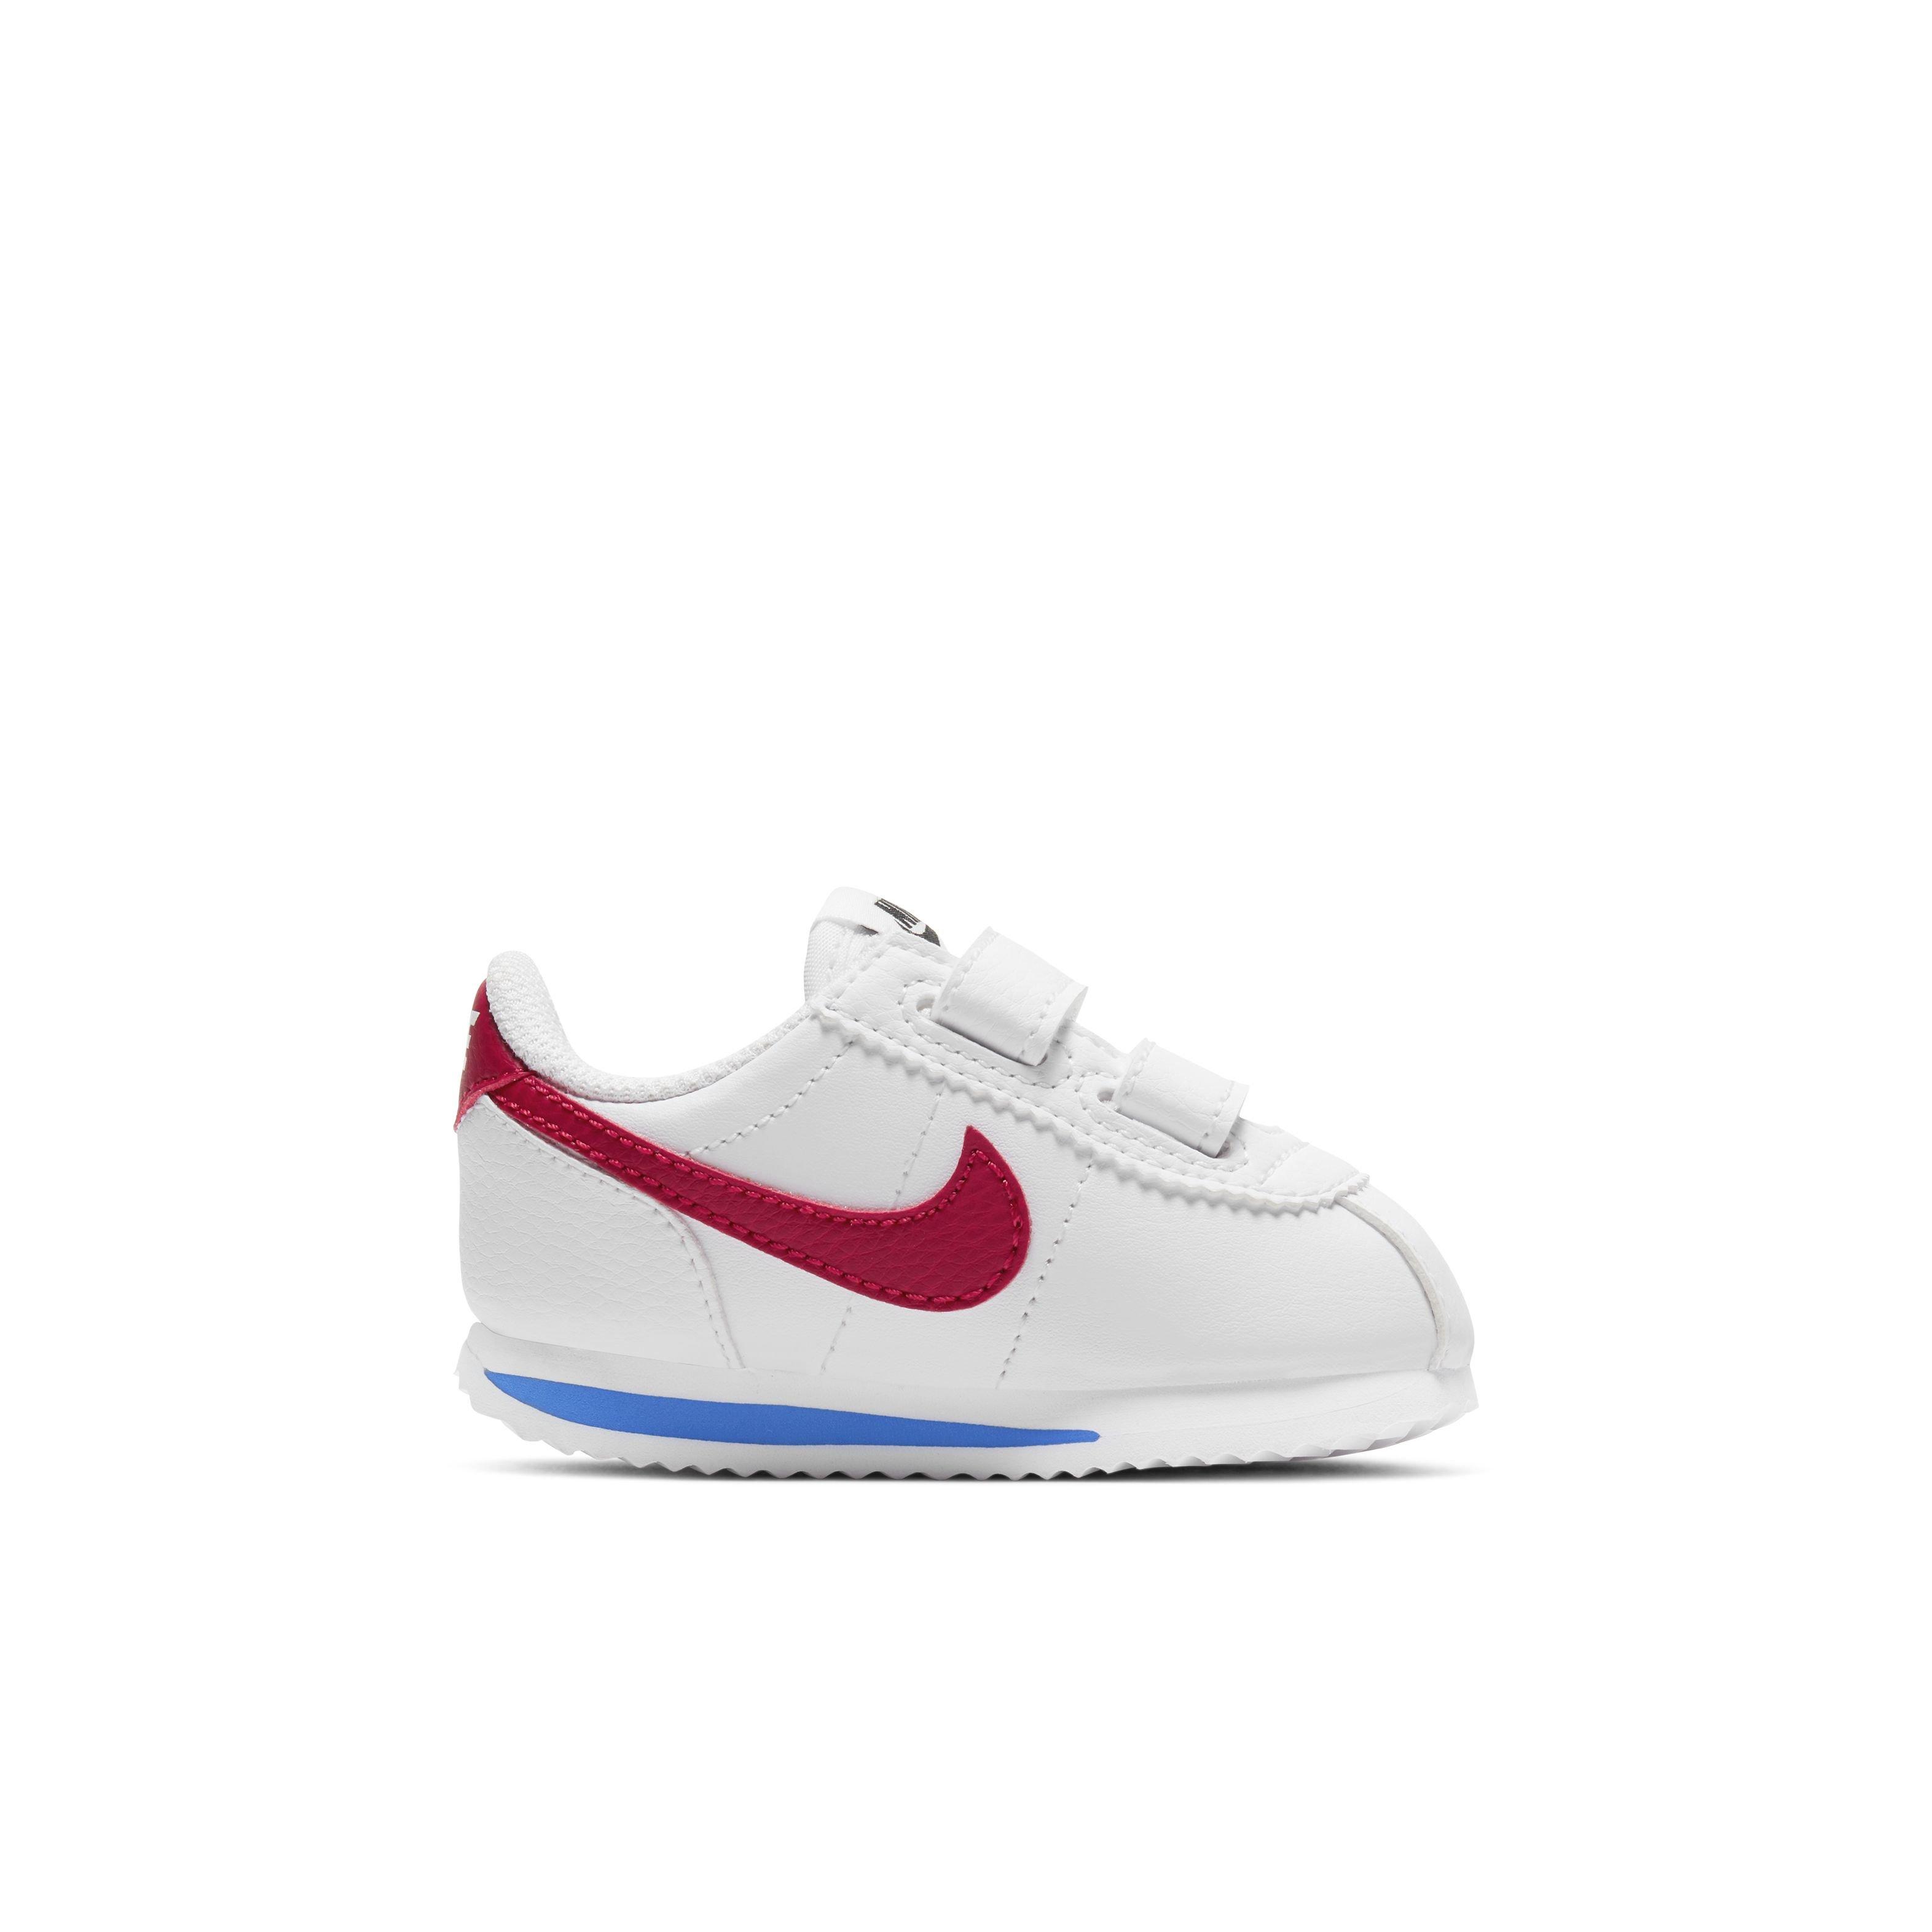 nike red and blue cortez